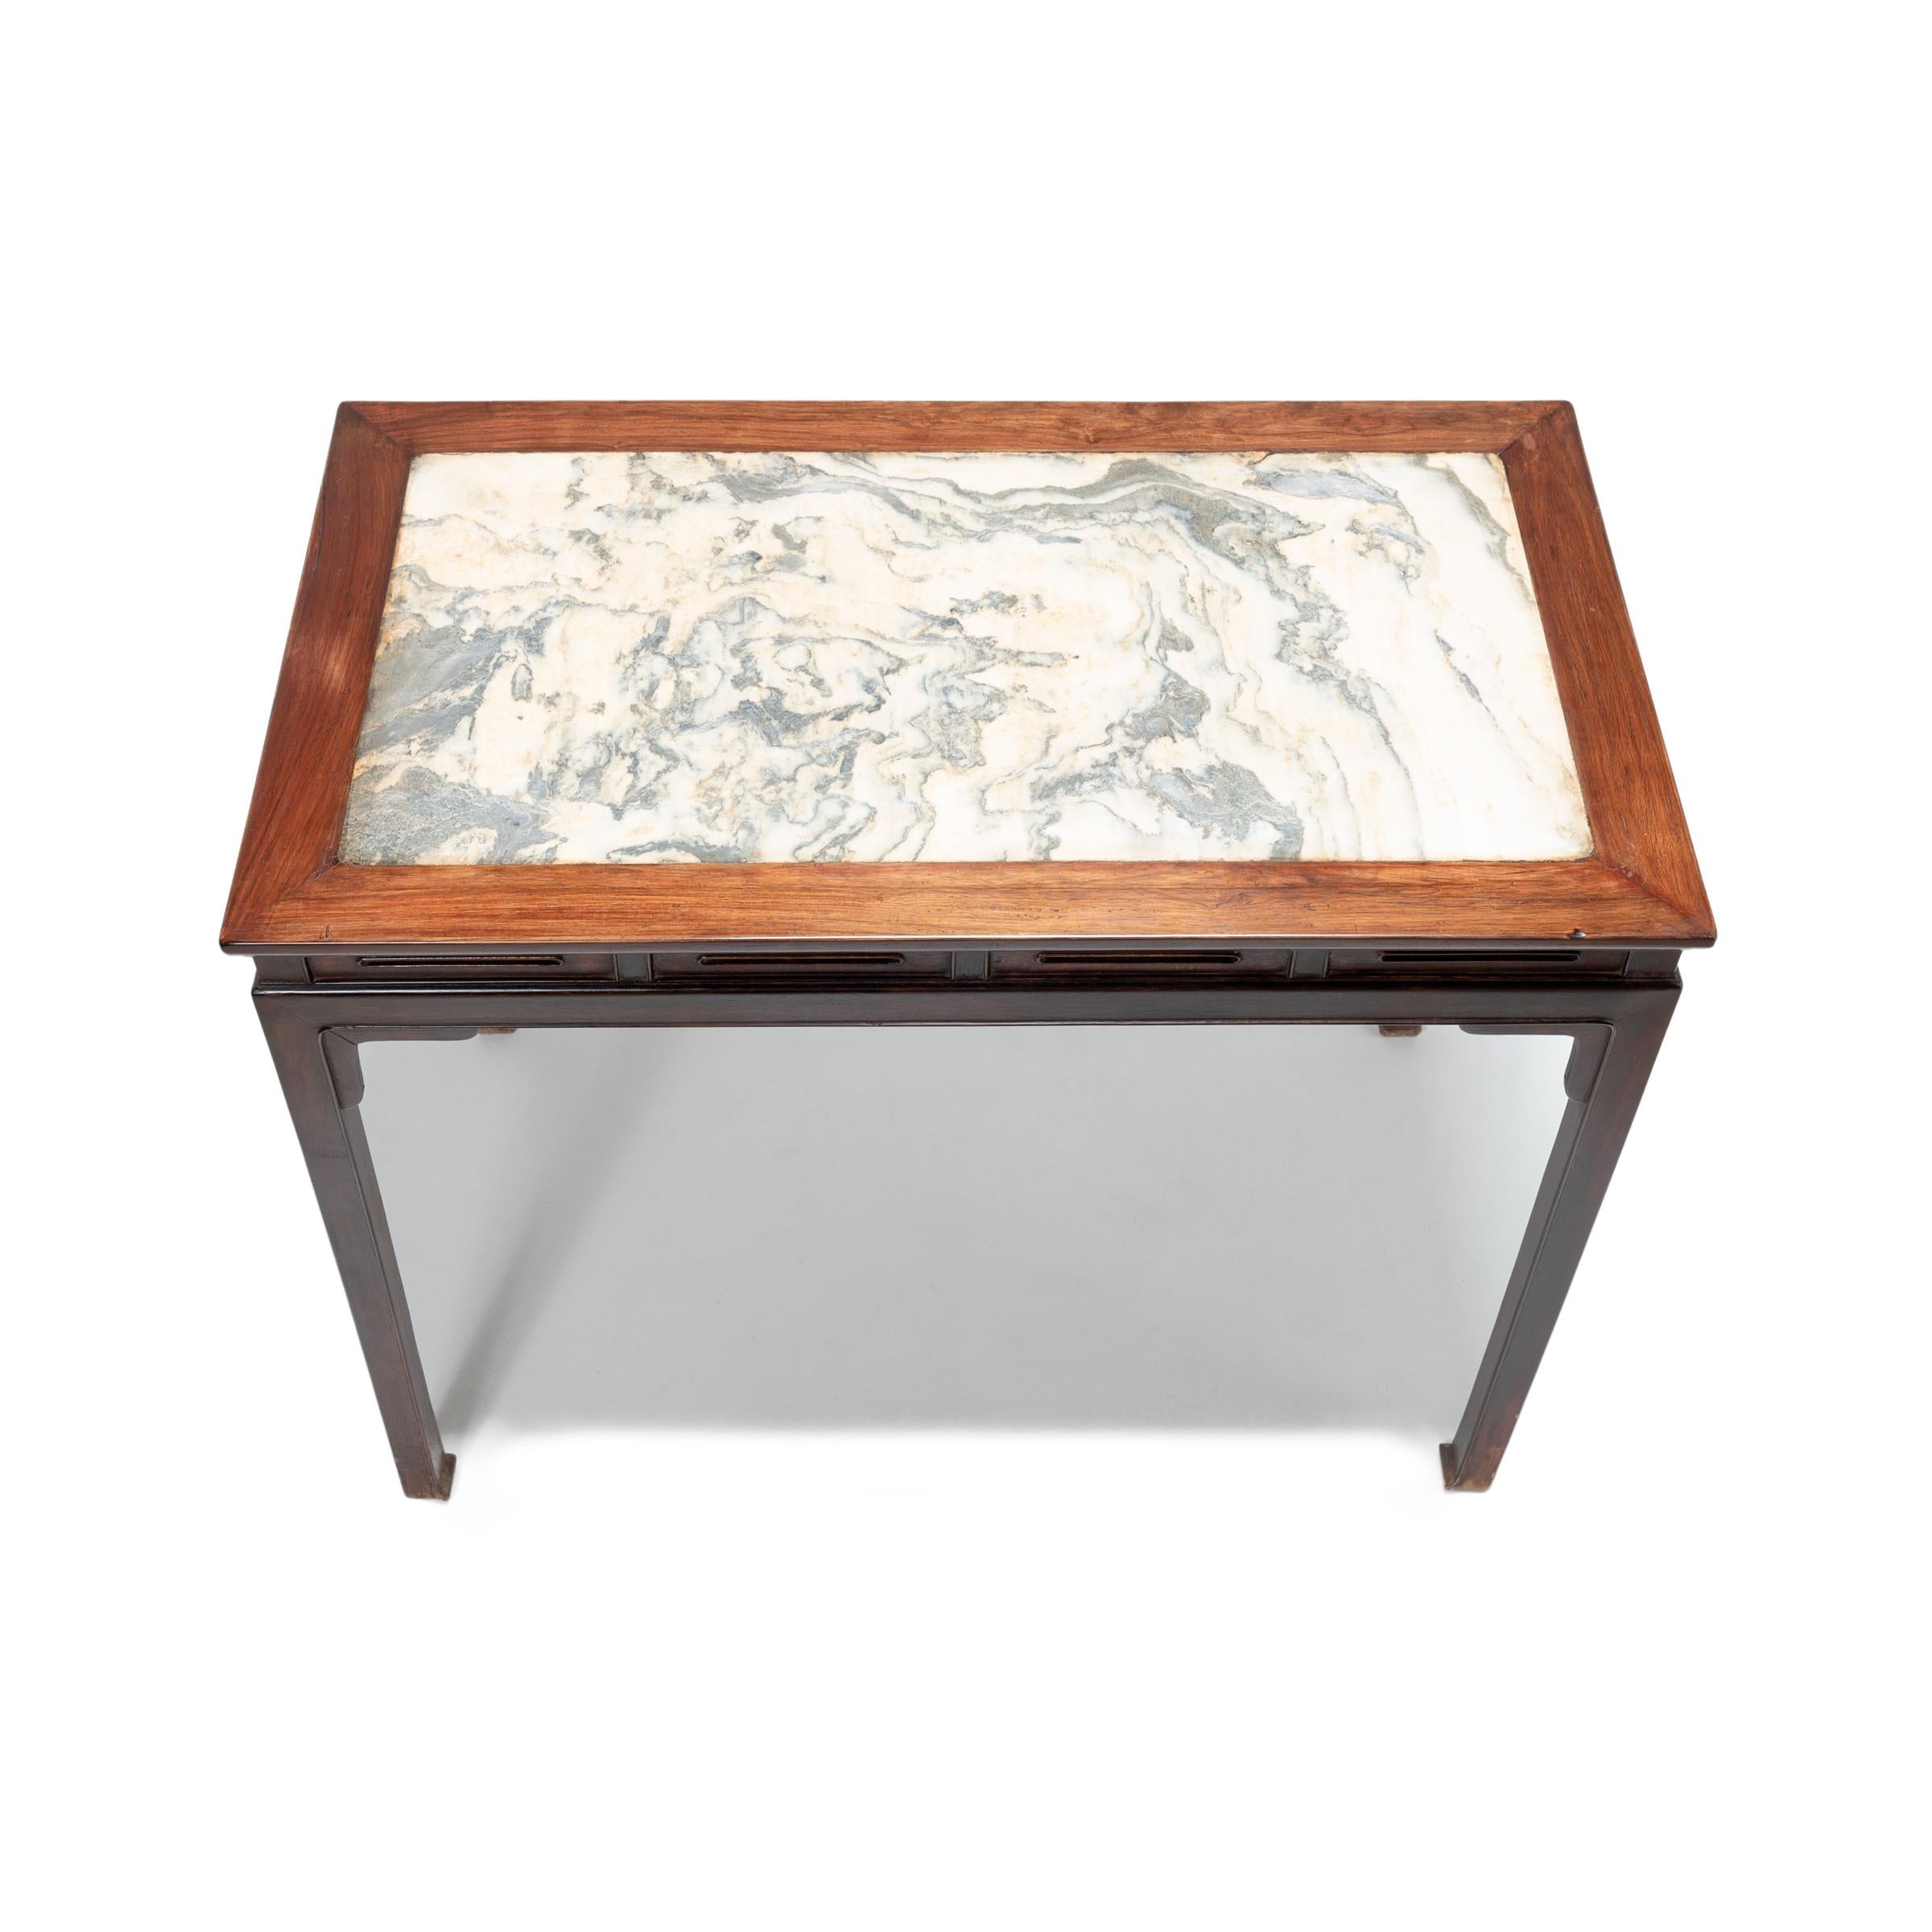 This vintage hardwood table from Beijing was crafted with graceful proportions in the manner of Ming design. It features a hand carved beaded apron, square legs ending in hoof feet, and a marble top selected for its resemblance to a Chinese